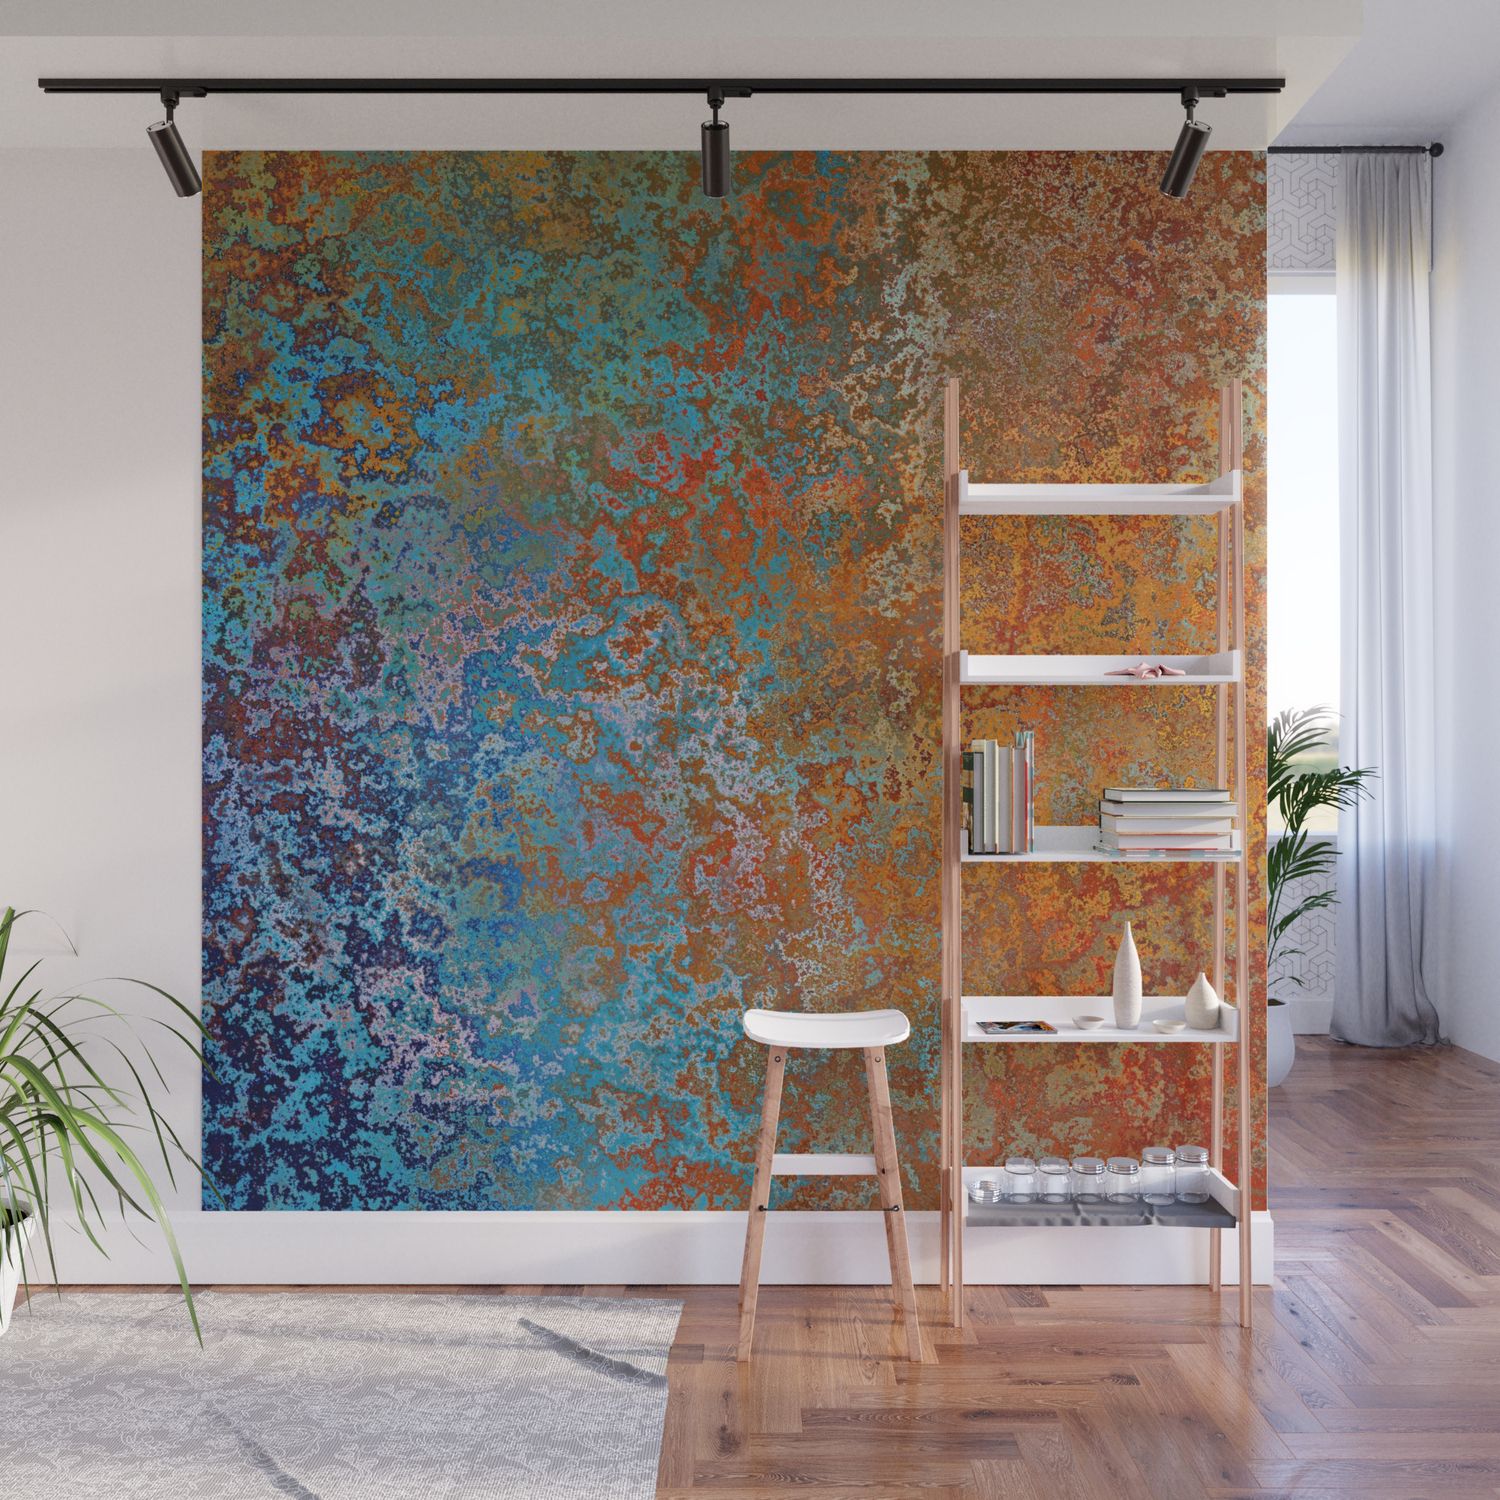 Vintage Rust, Copper And Blue Wall Muralmegan Morris | Society6 Throughout Vintage Rust Wall Art (View 12 of 15)